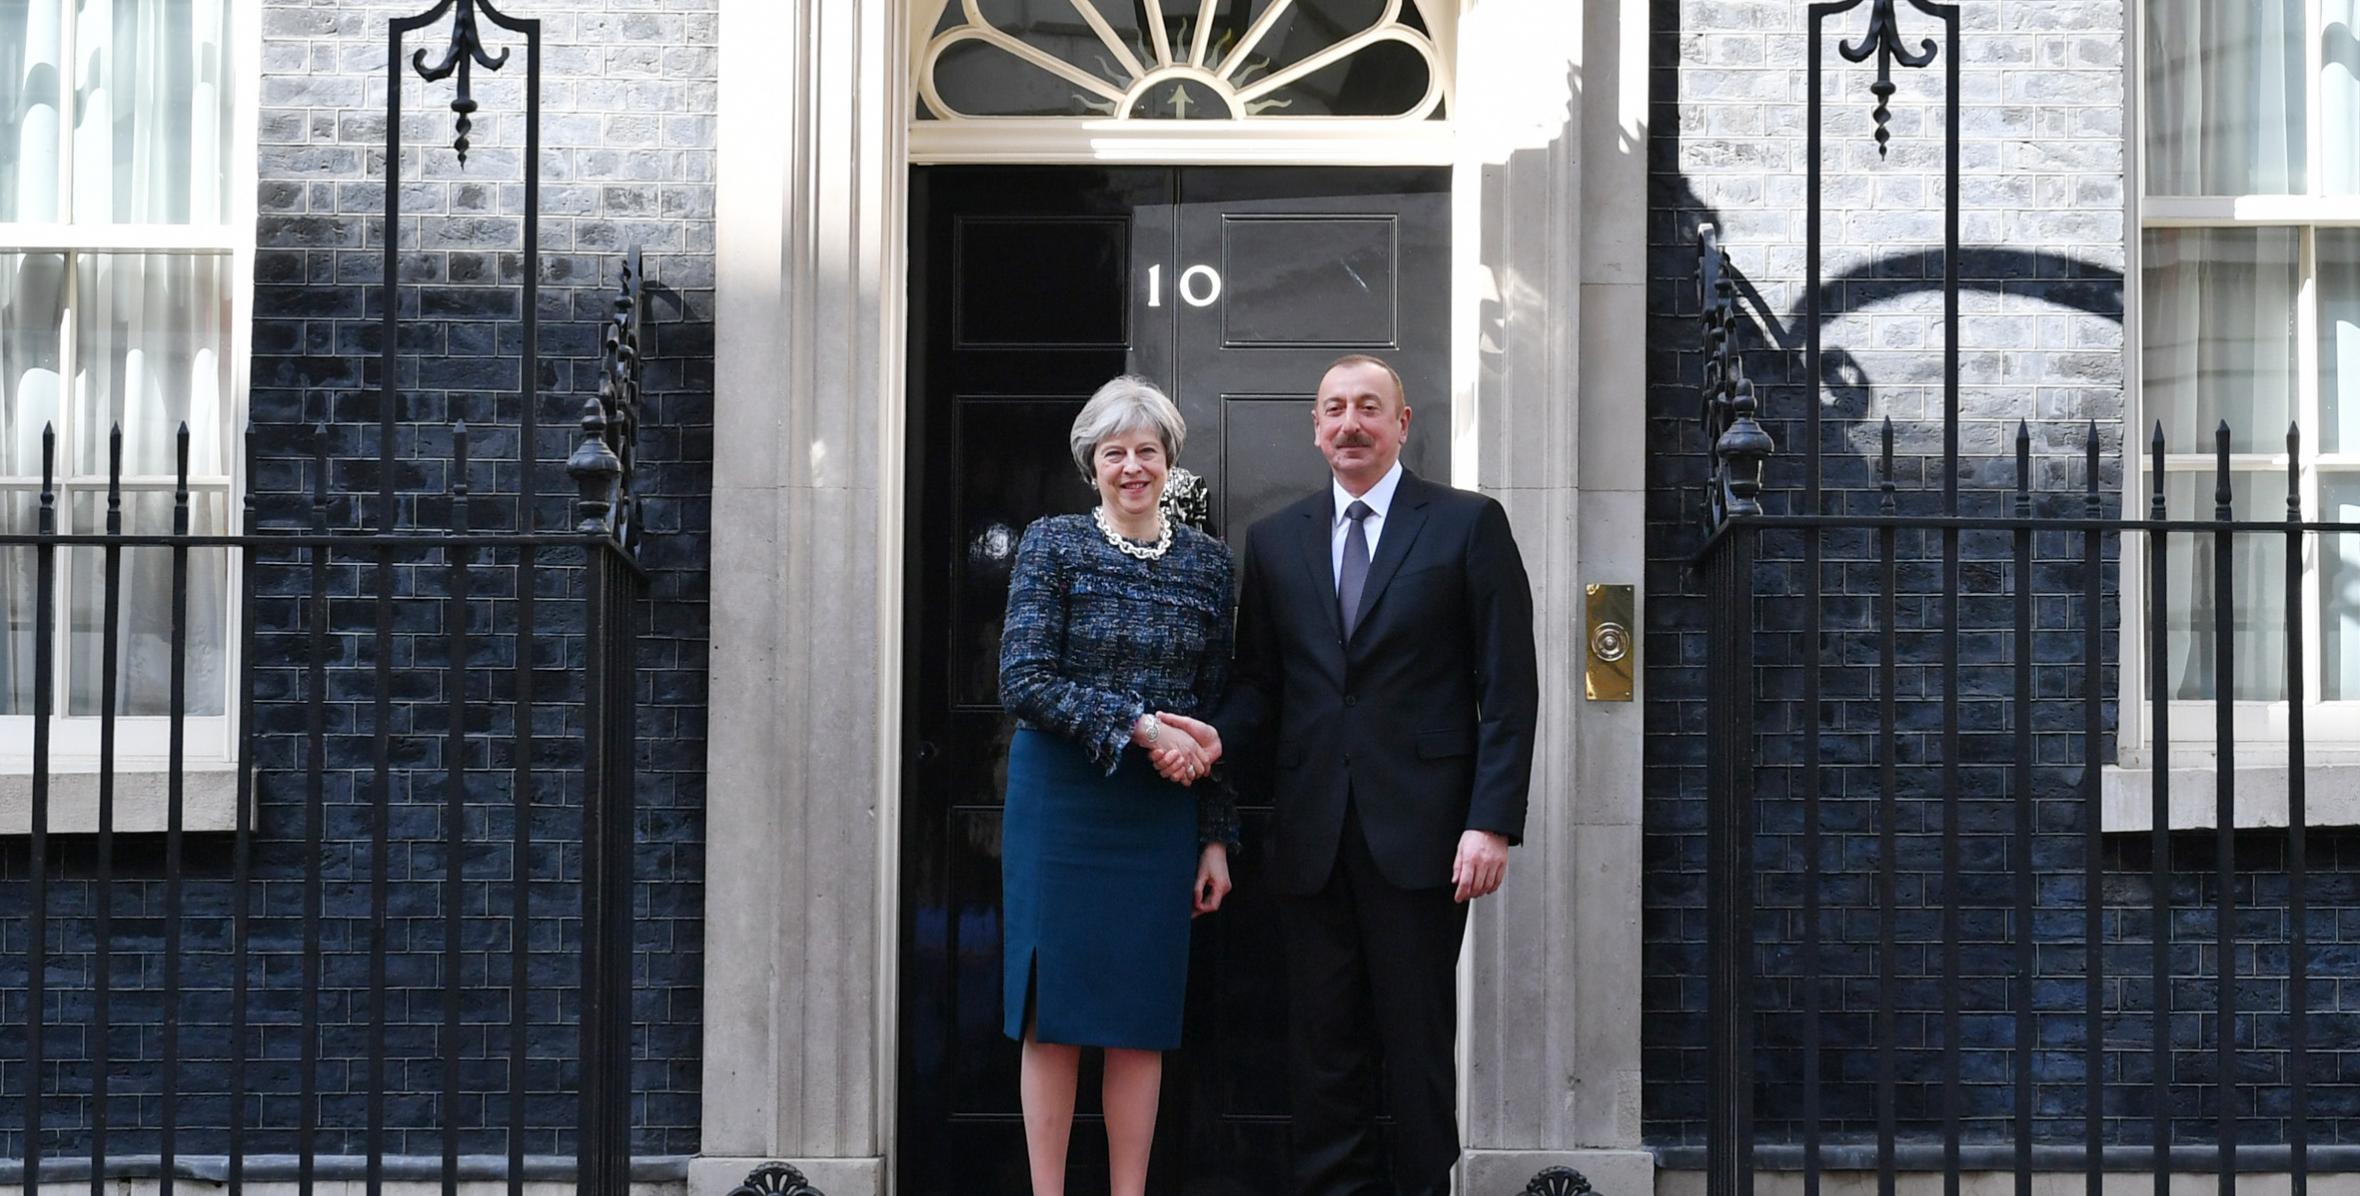 Ilham Aliyev met with UK Prime Minister Theresa May